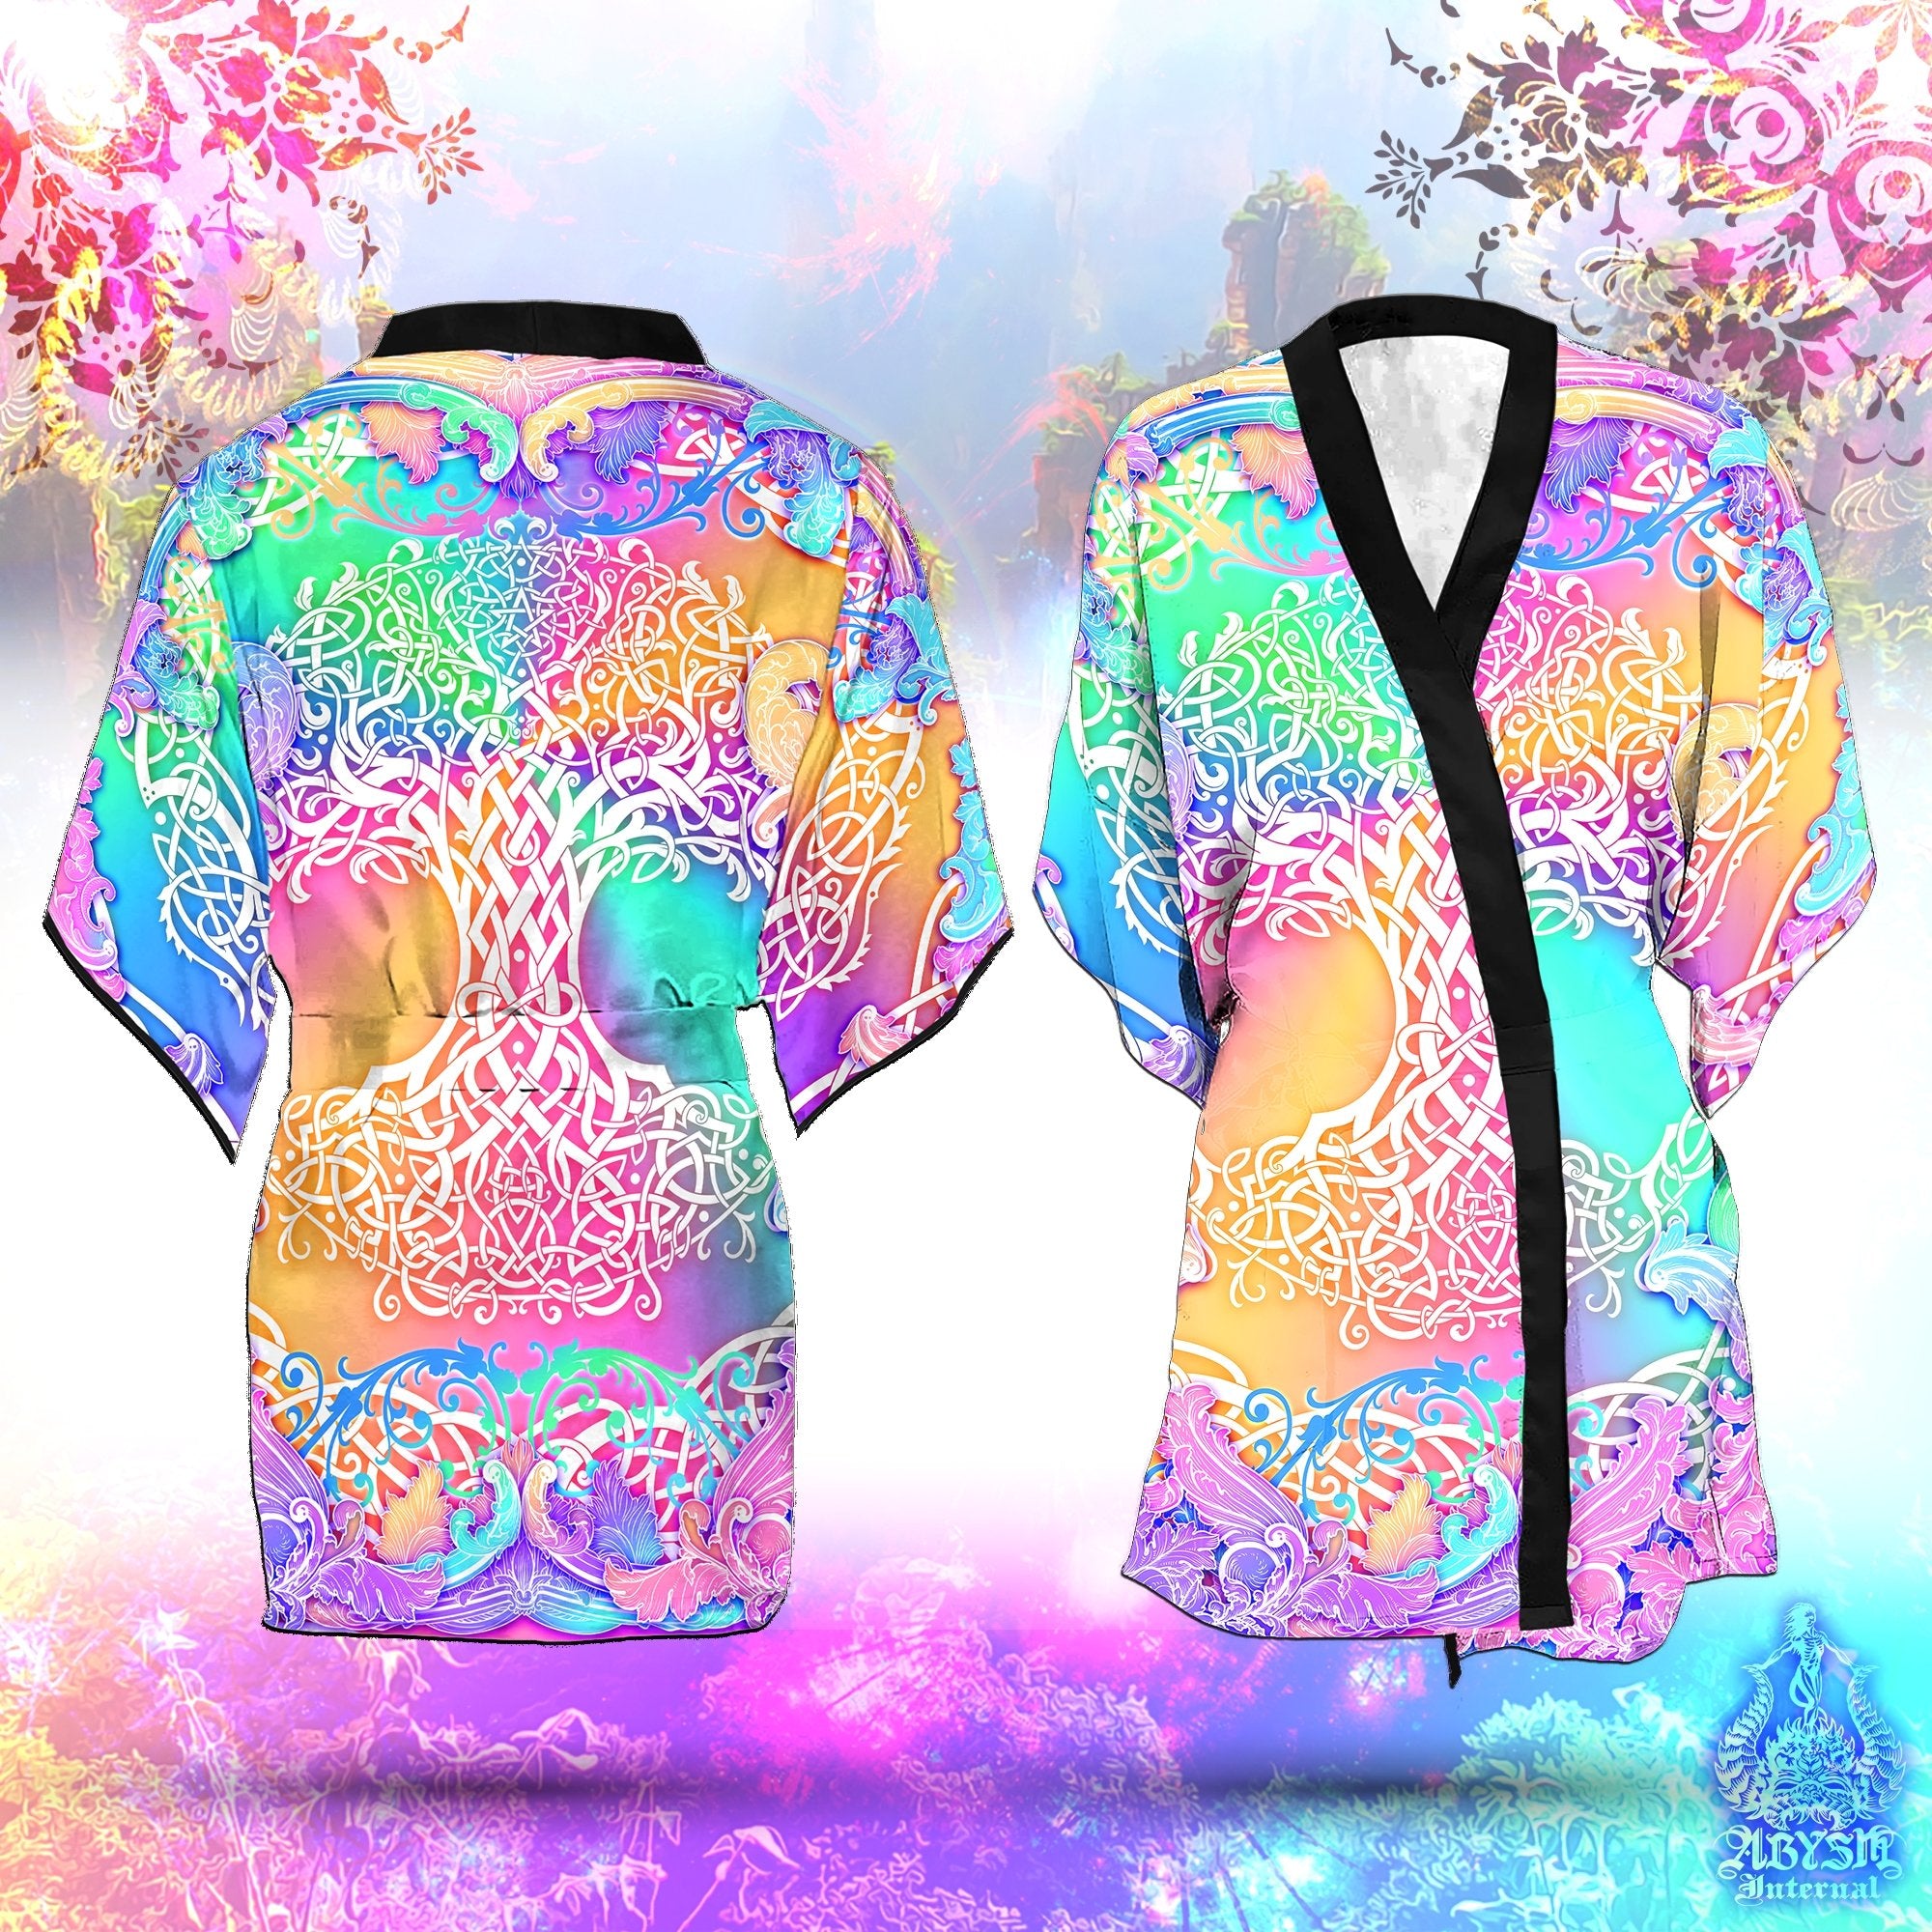 Tree of Life Cover Up, Beach Rave Outfit, Celtic Party Kimono, Wicca Summer Festival Robe, Aesthetic Witchy Indie and Alternative Clothing, Unisex - Holographic Pastel - Abysm Internal